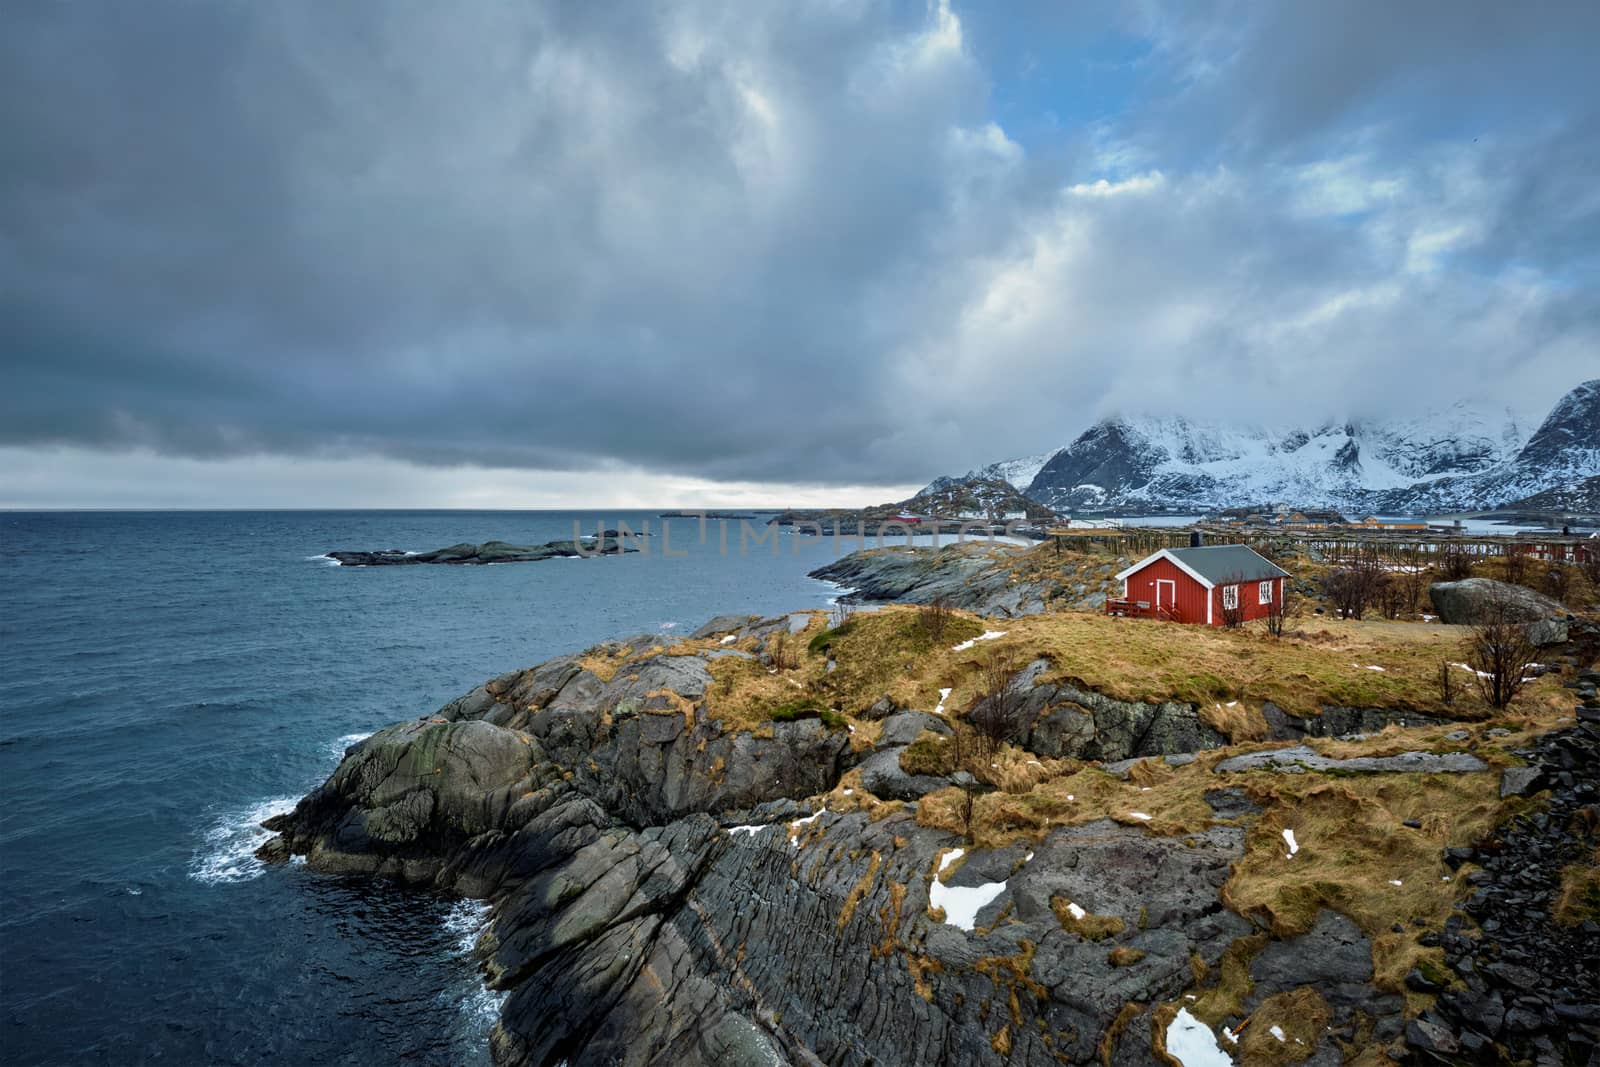 Clif with traditional red rorbu house on Lofoten Islands, Norway by dimol